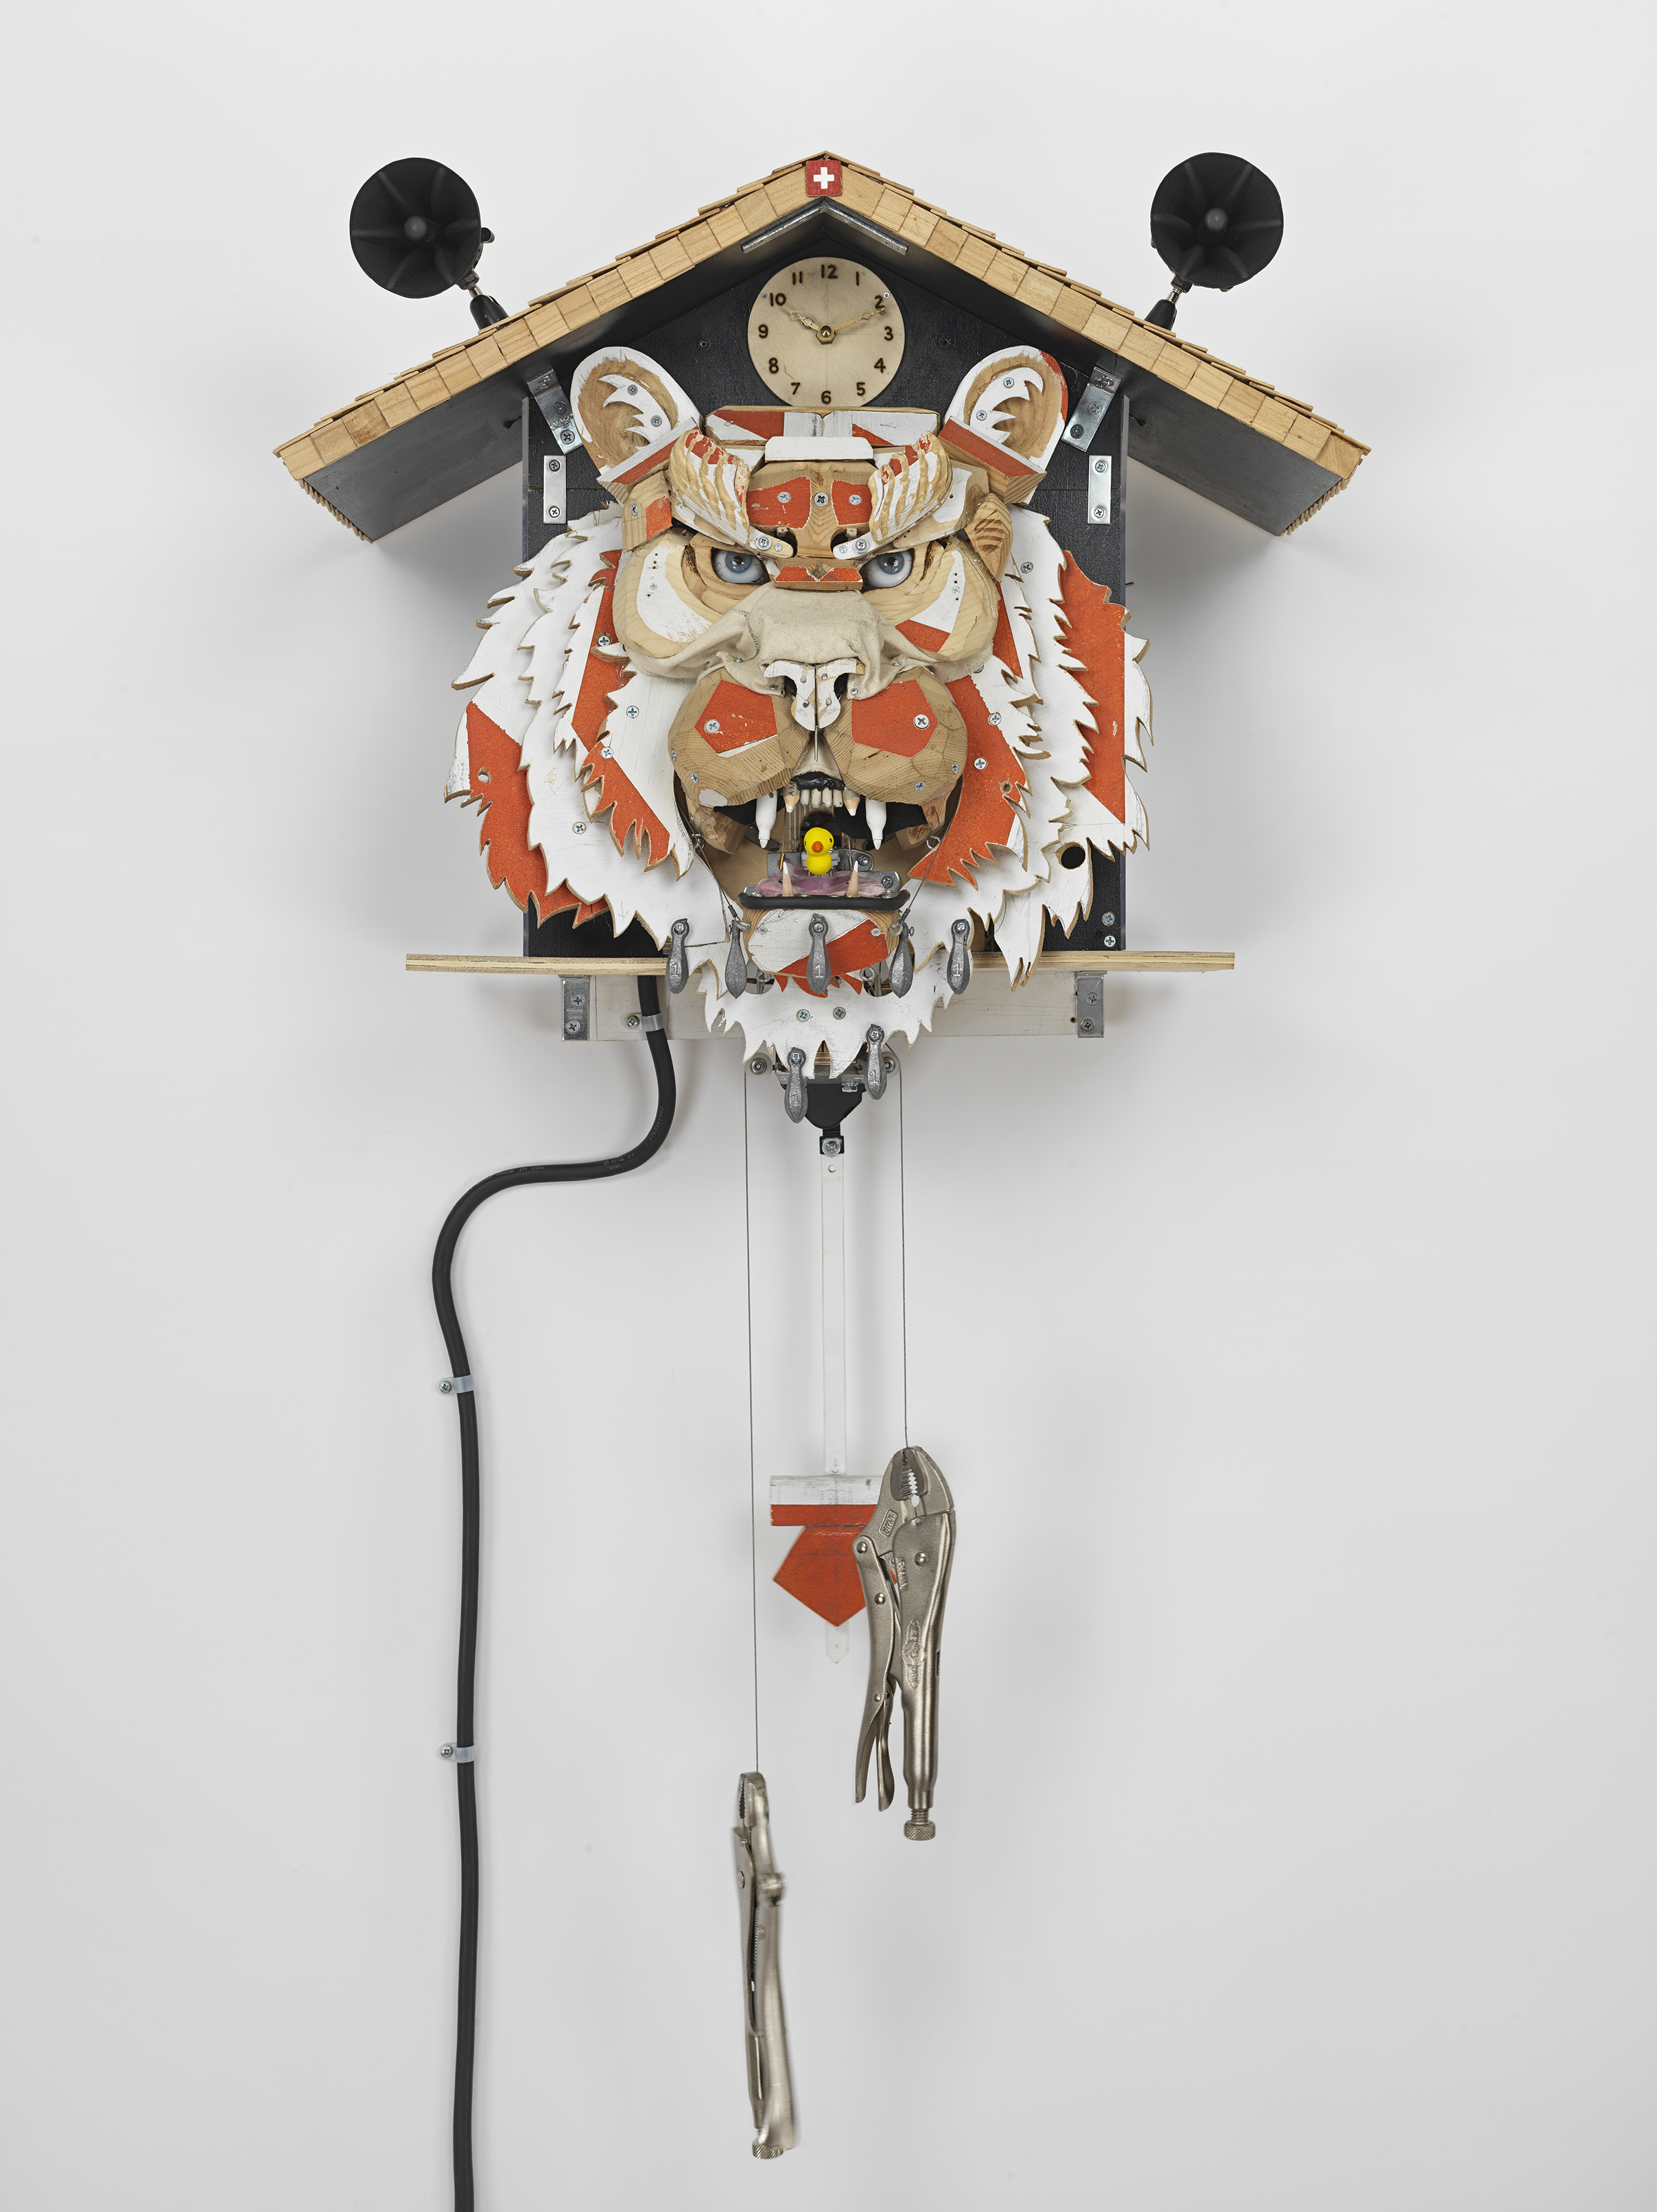 HELVETIAPHILIA,” AN EXHIBITION BY TOM SACHS AT VITO SCHNABEL, ST